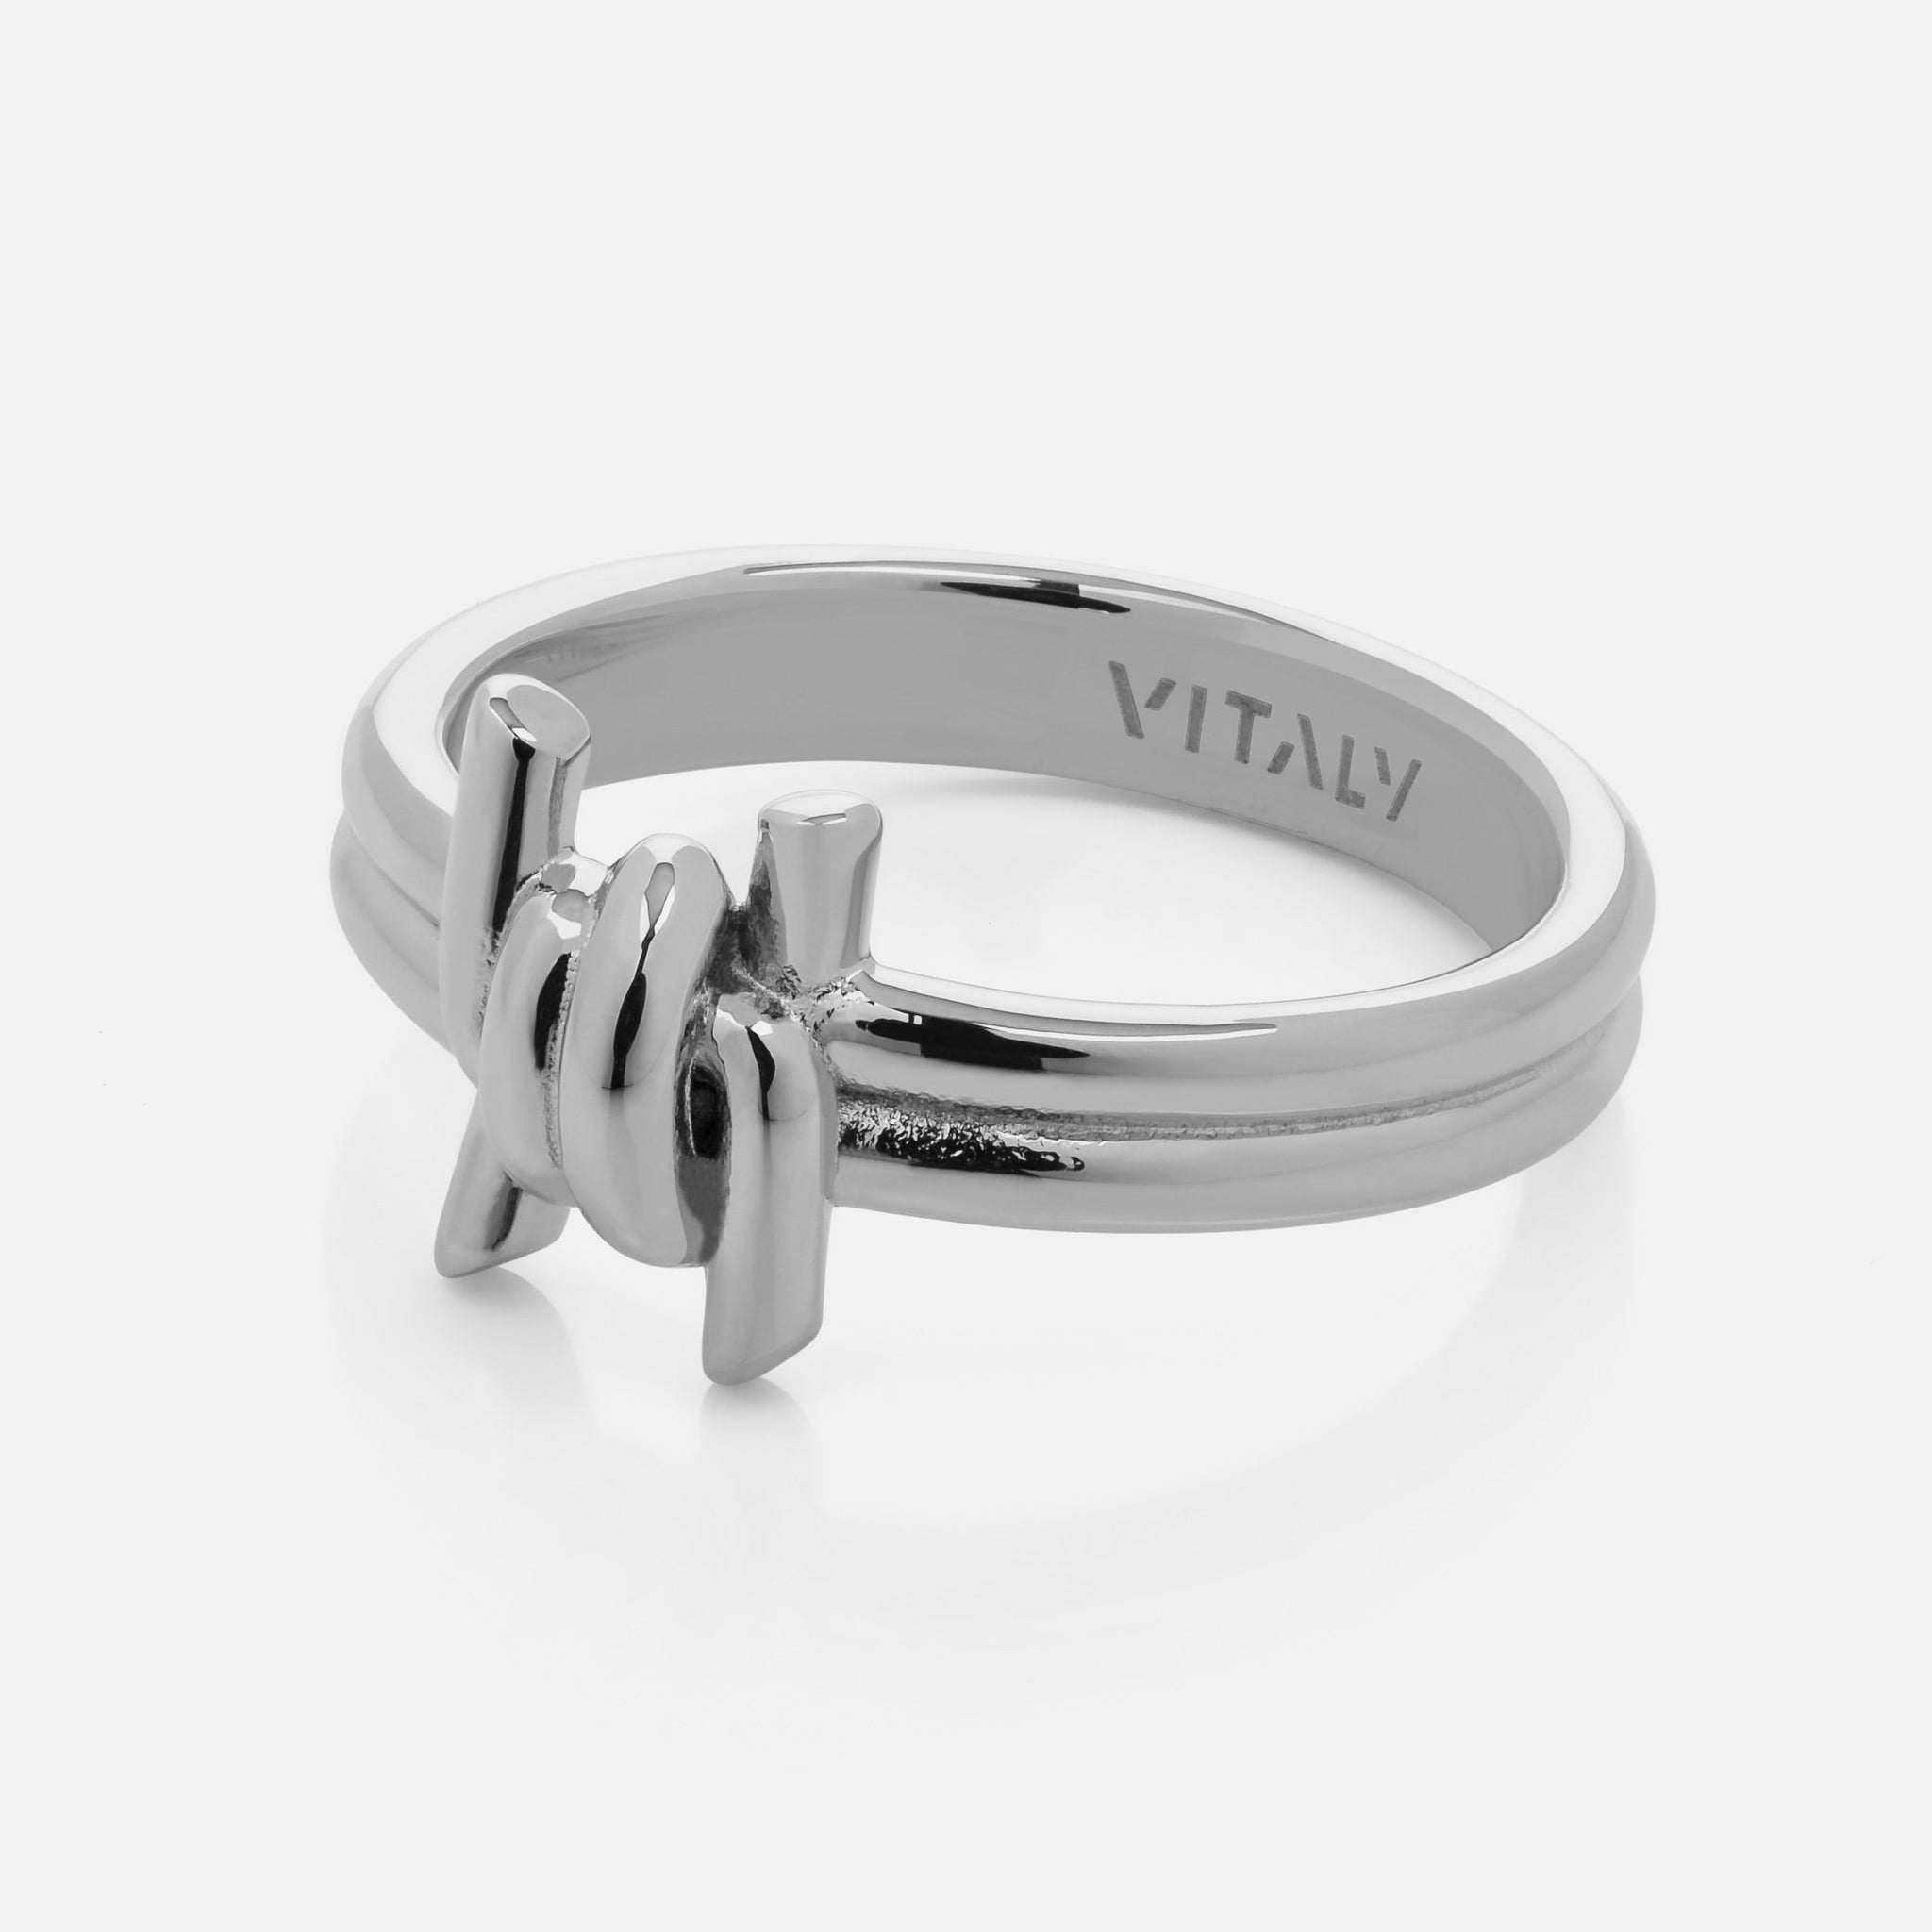 Vitaly Perimeter Ring | 100% Recycled Stainless Steel Accessories